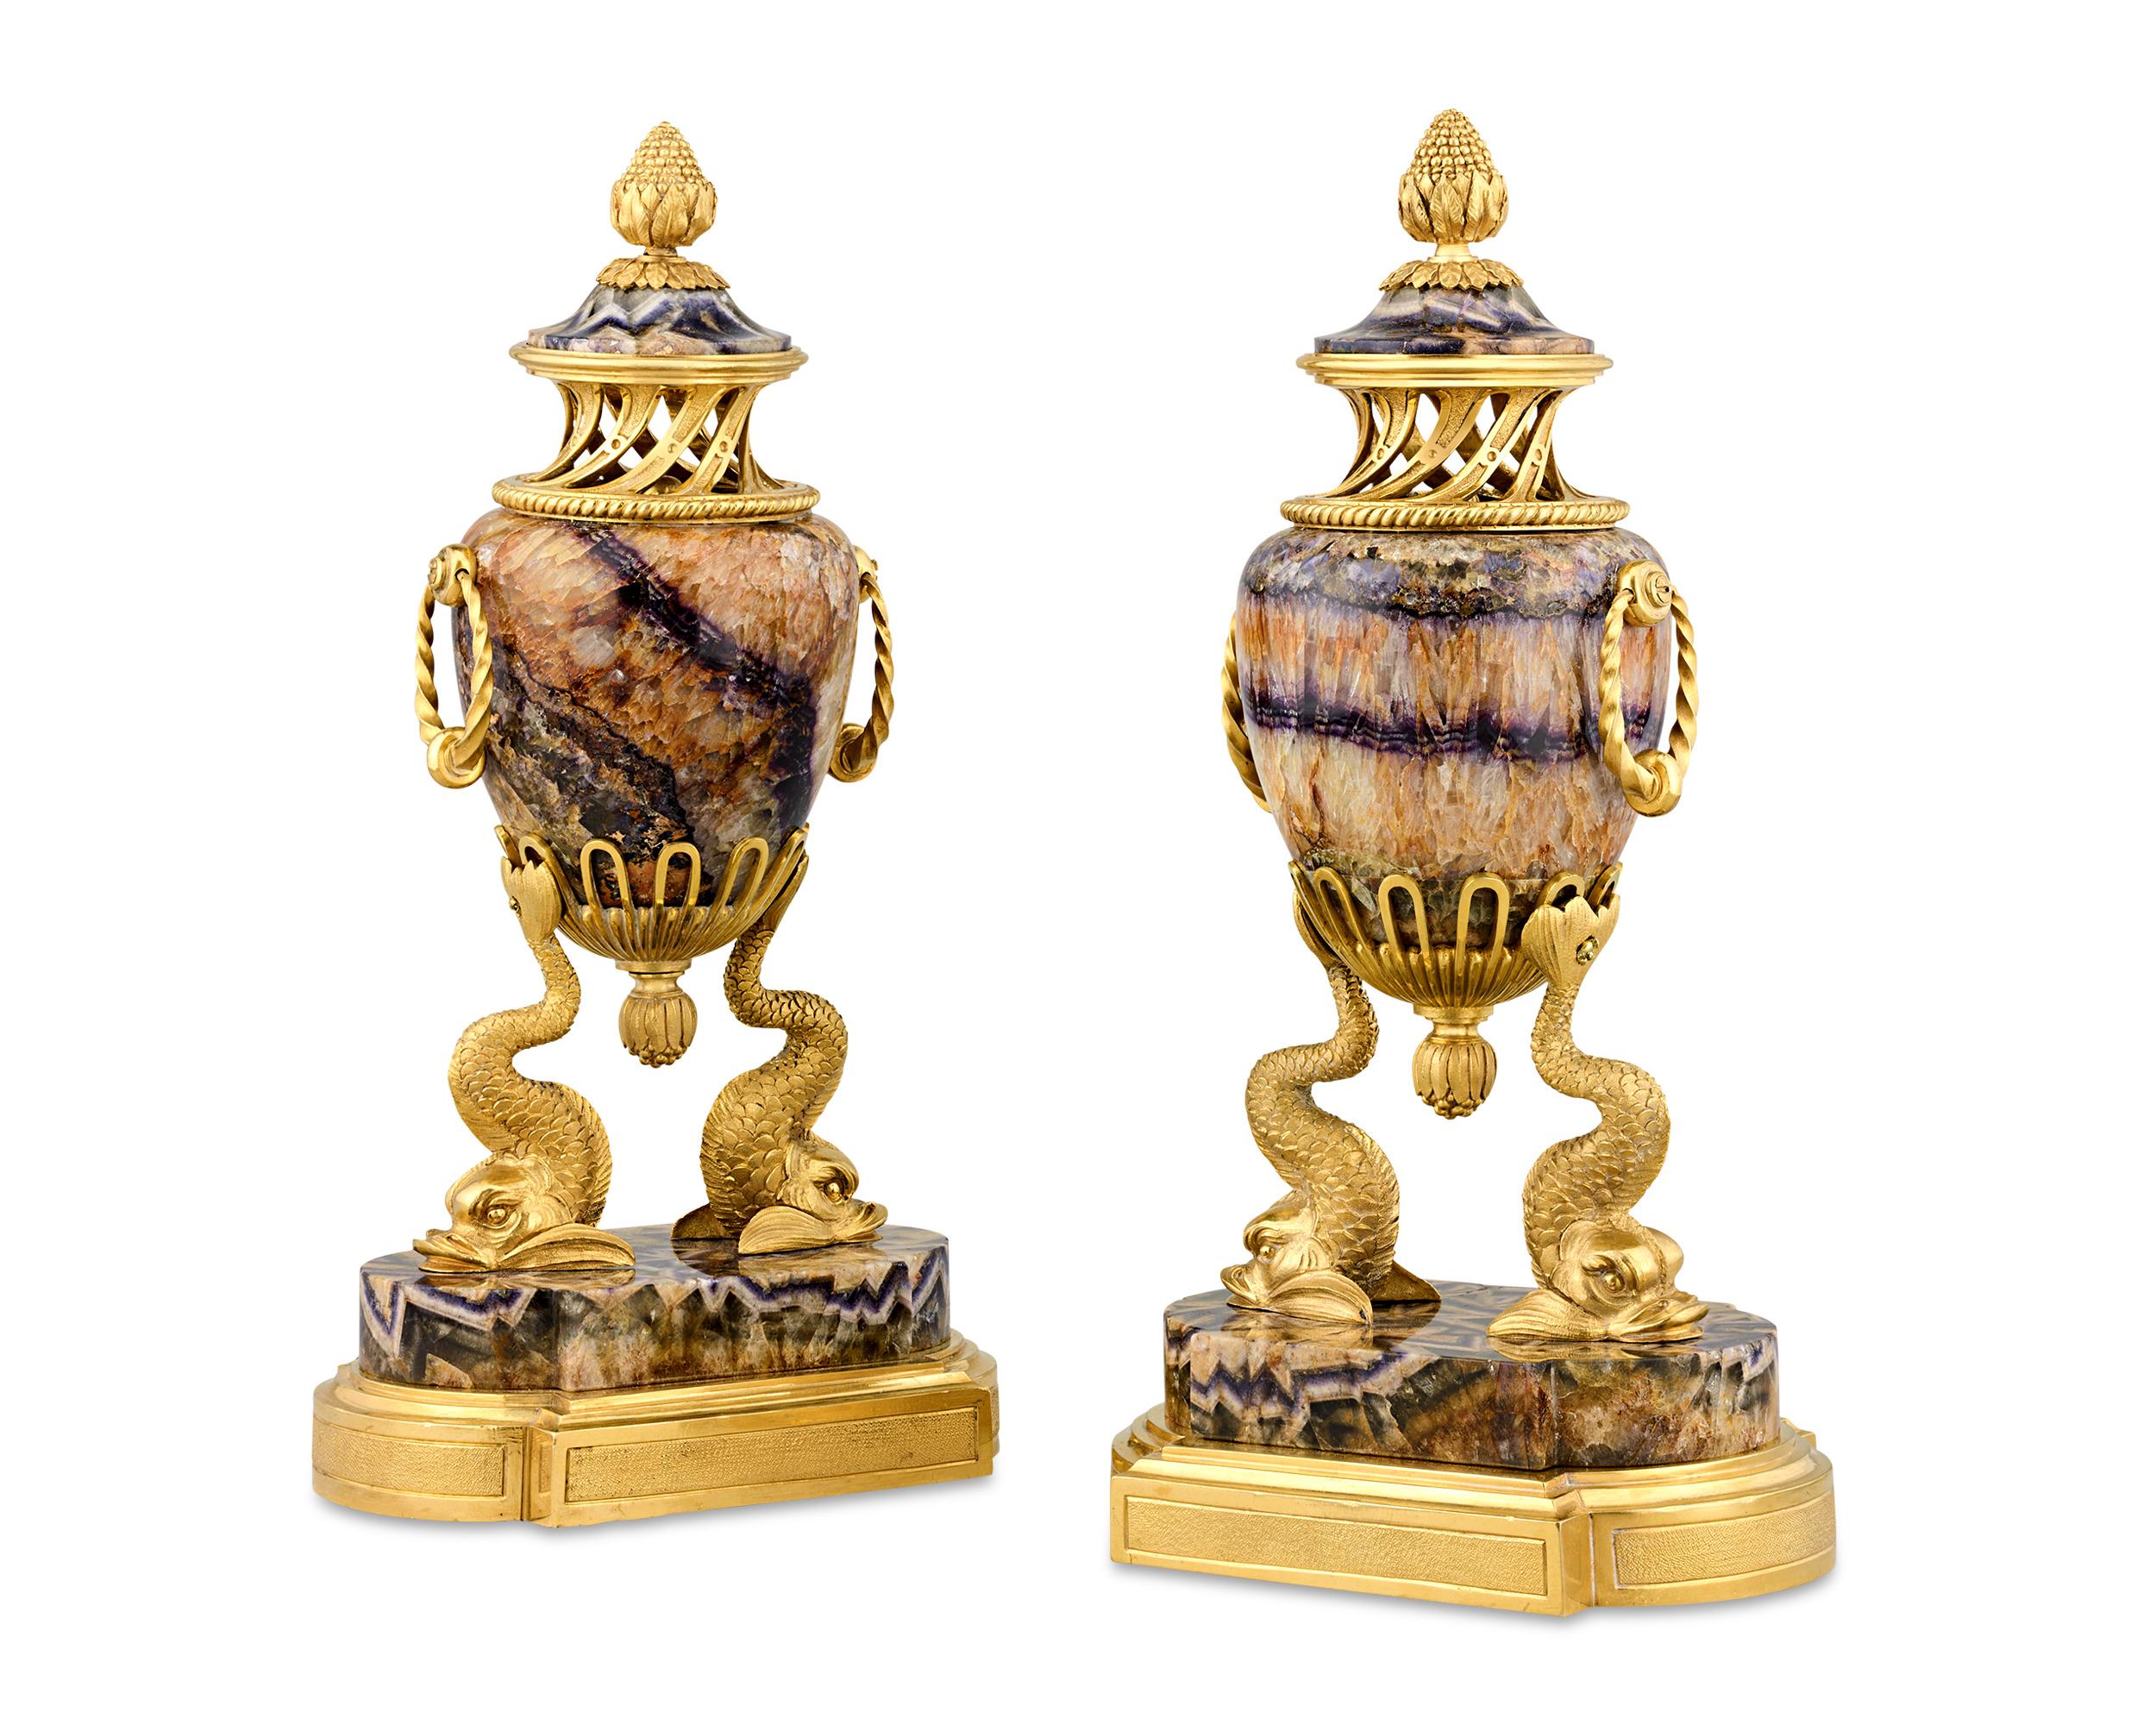 Blending natural wonder and artistic prowess, this magnificent pair of cassolettes is a symphony of craftsmanship. The intricate gilt bronze decor, only made possible by the finest craftsmen of the 19th century, is further elevated by the bodies,